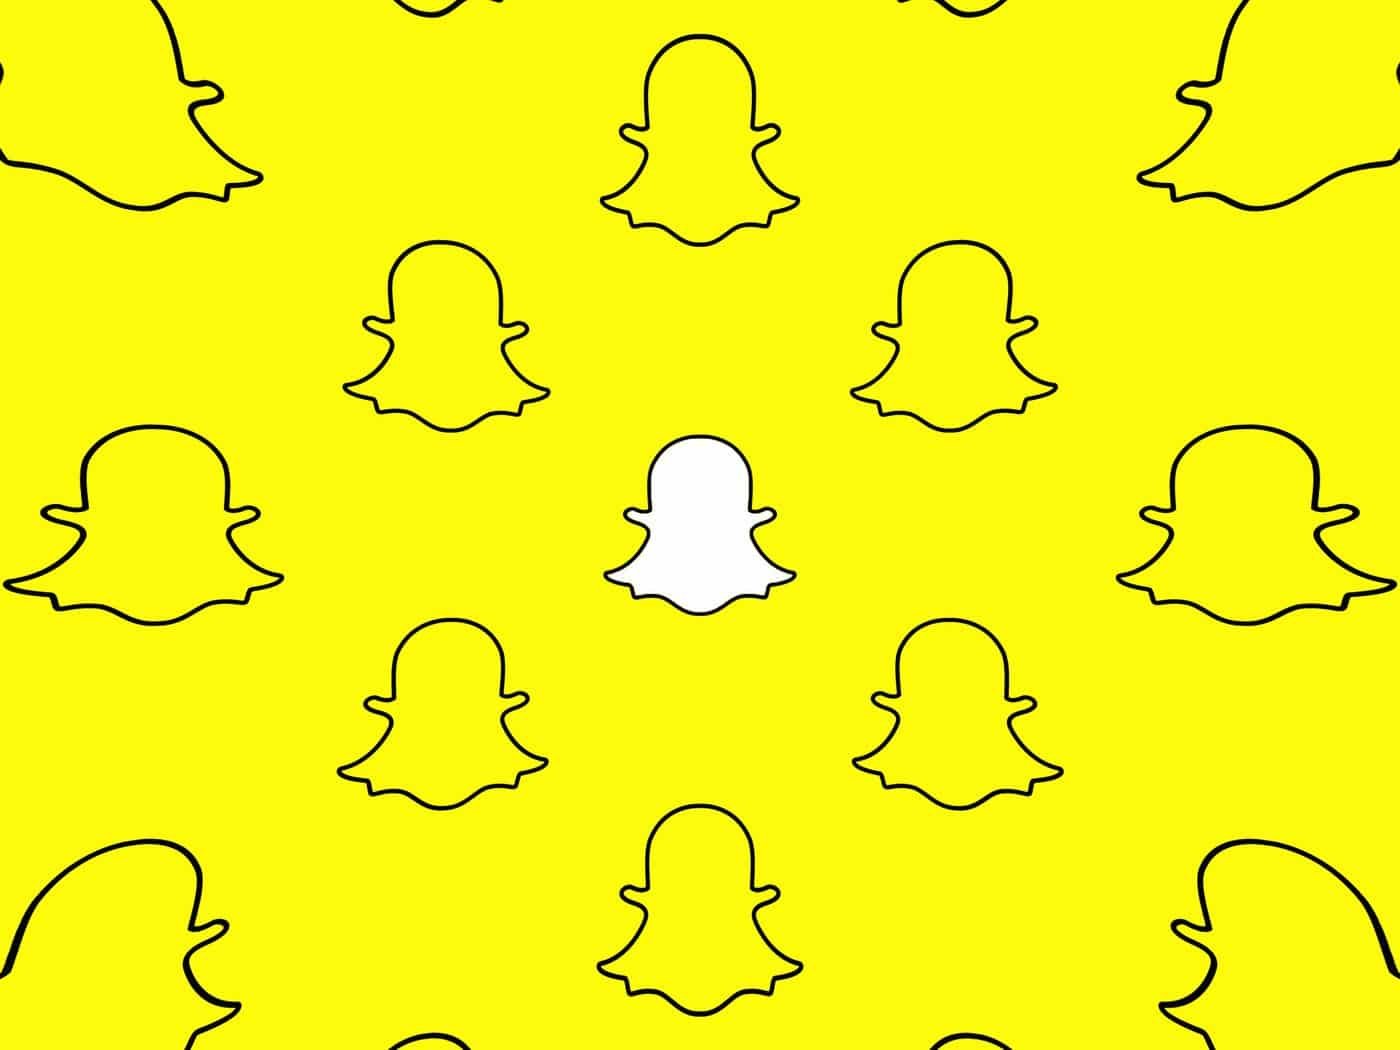 How to Change Snapchat Username - Easiest Guide